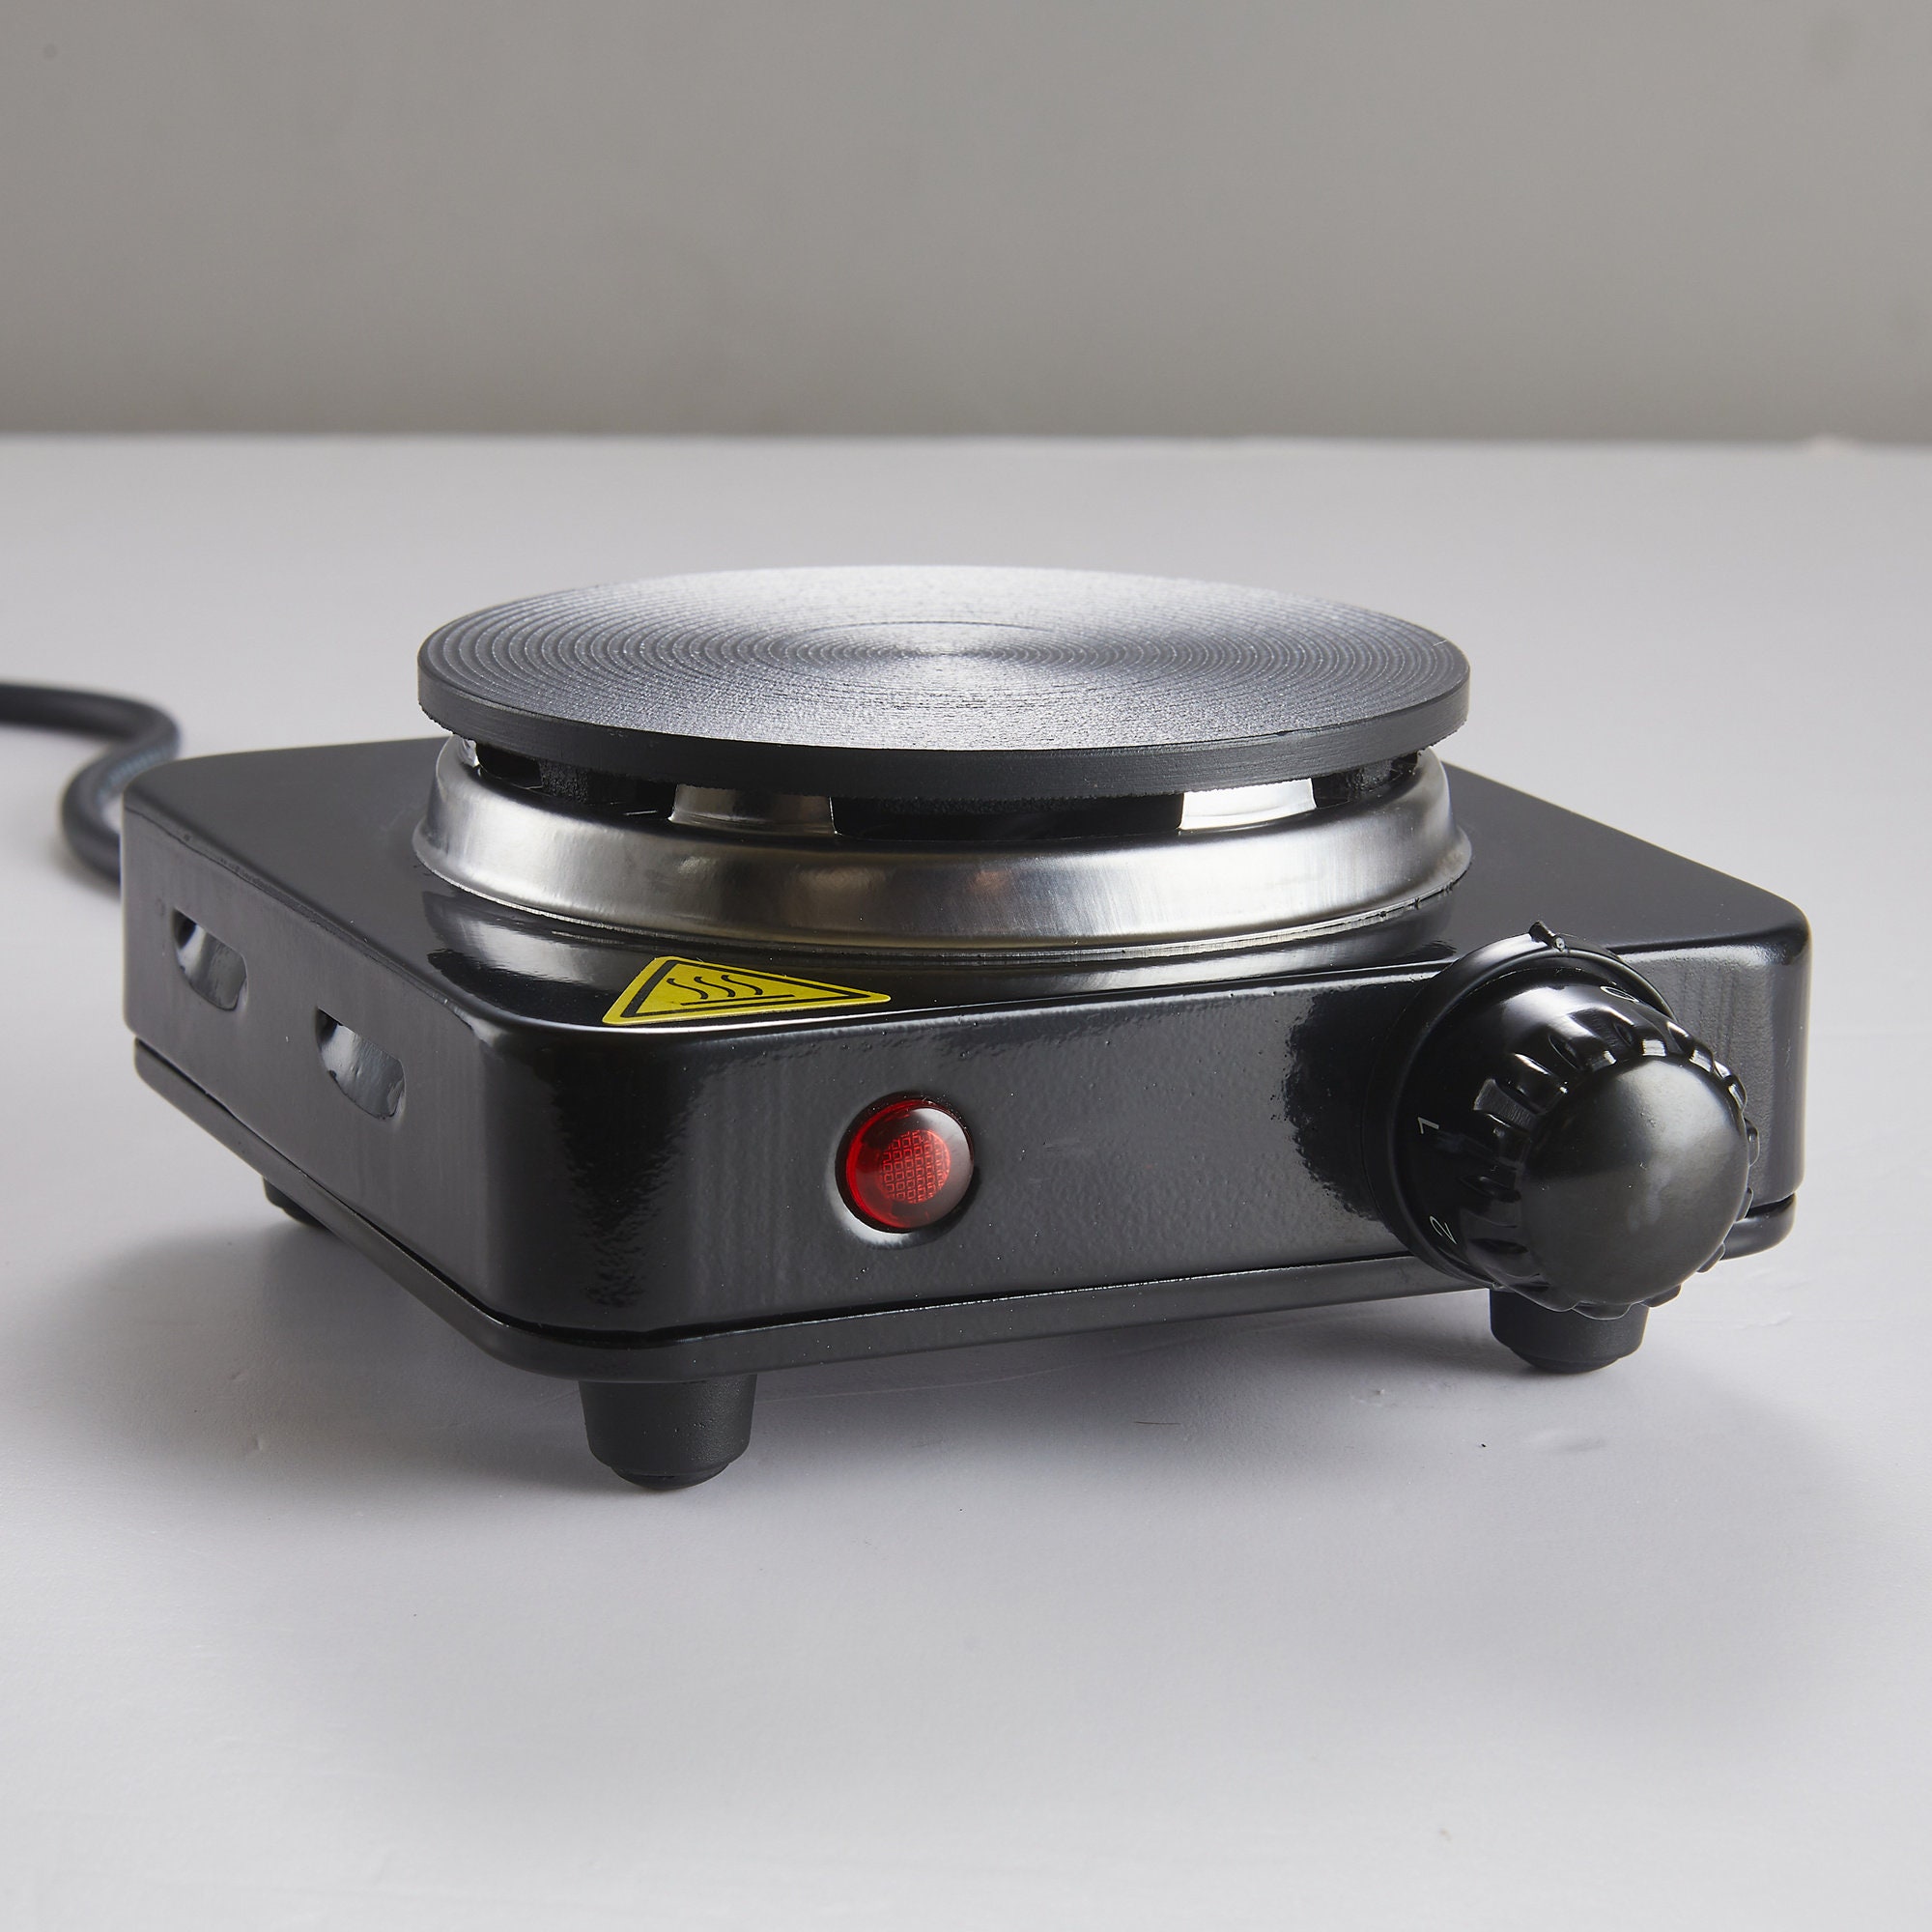 Electrical Hot Plate for Candle Making, Fast Wax Melting Machine